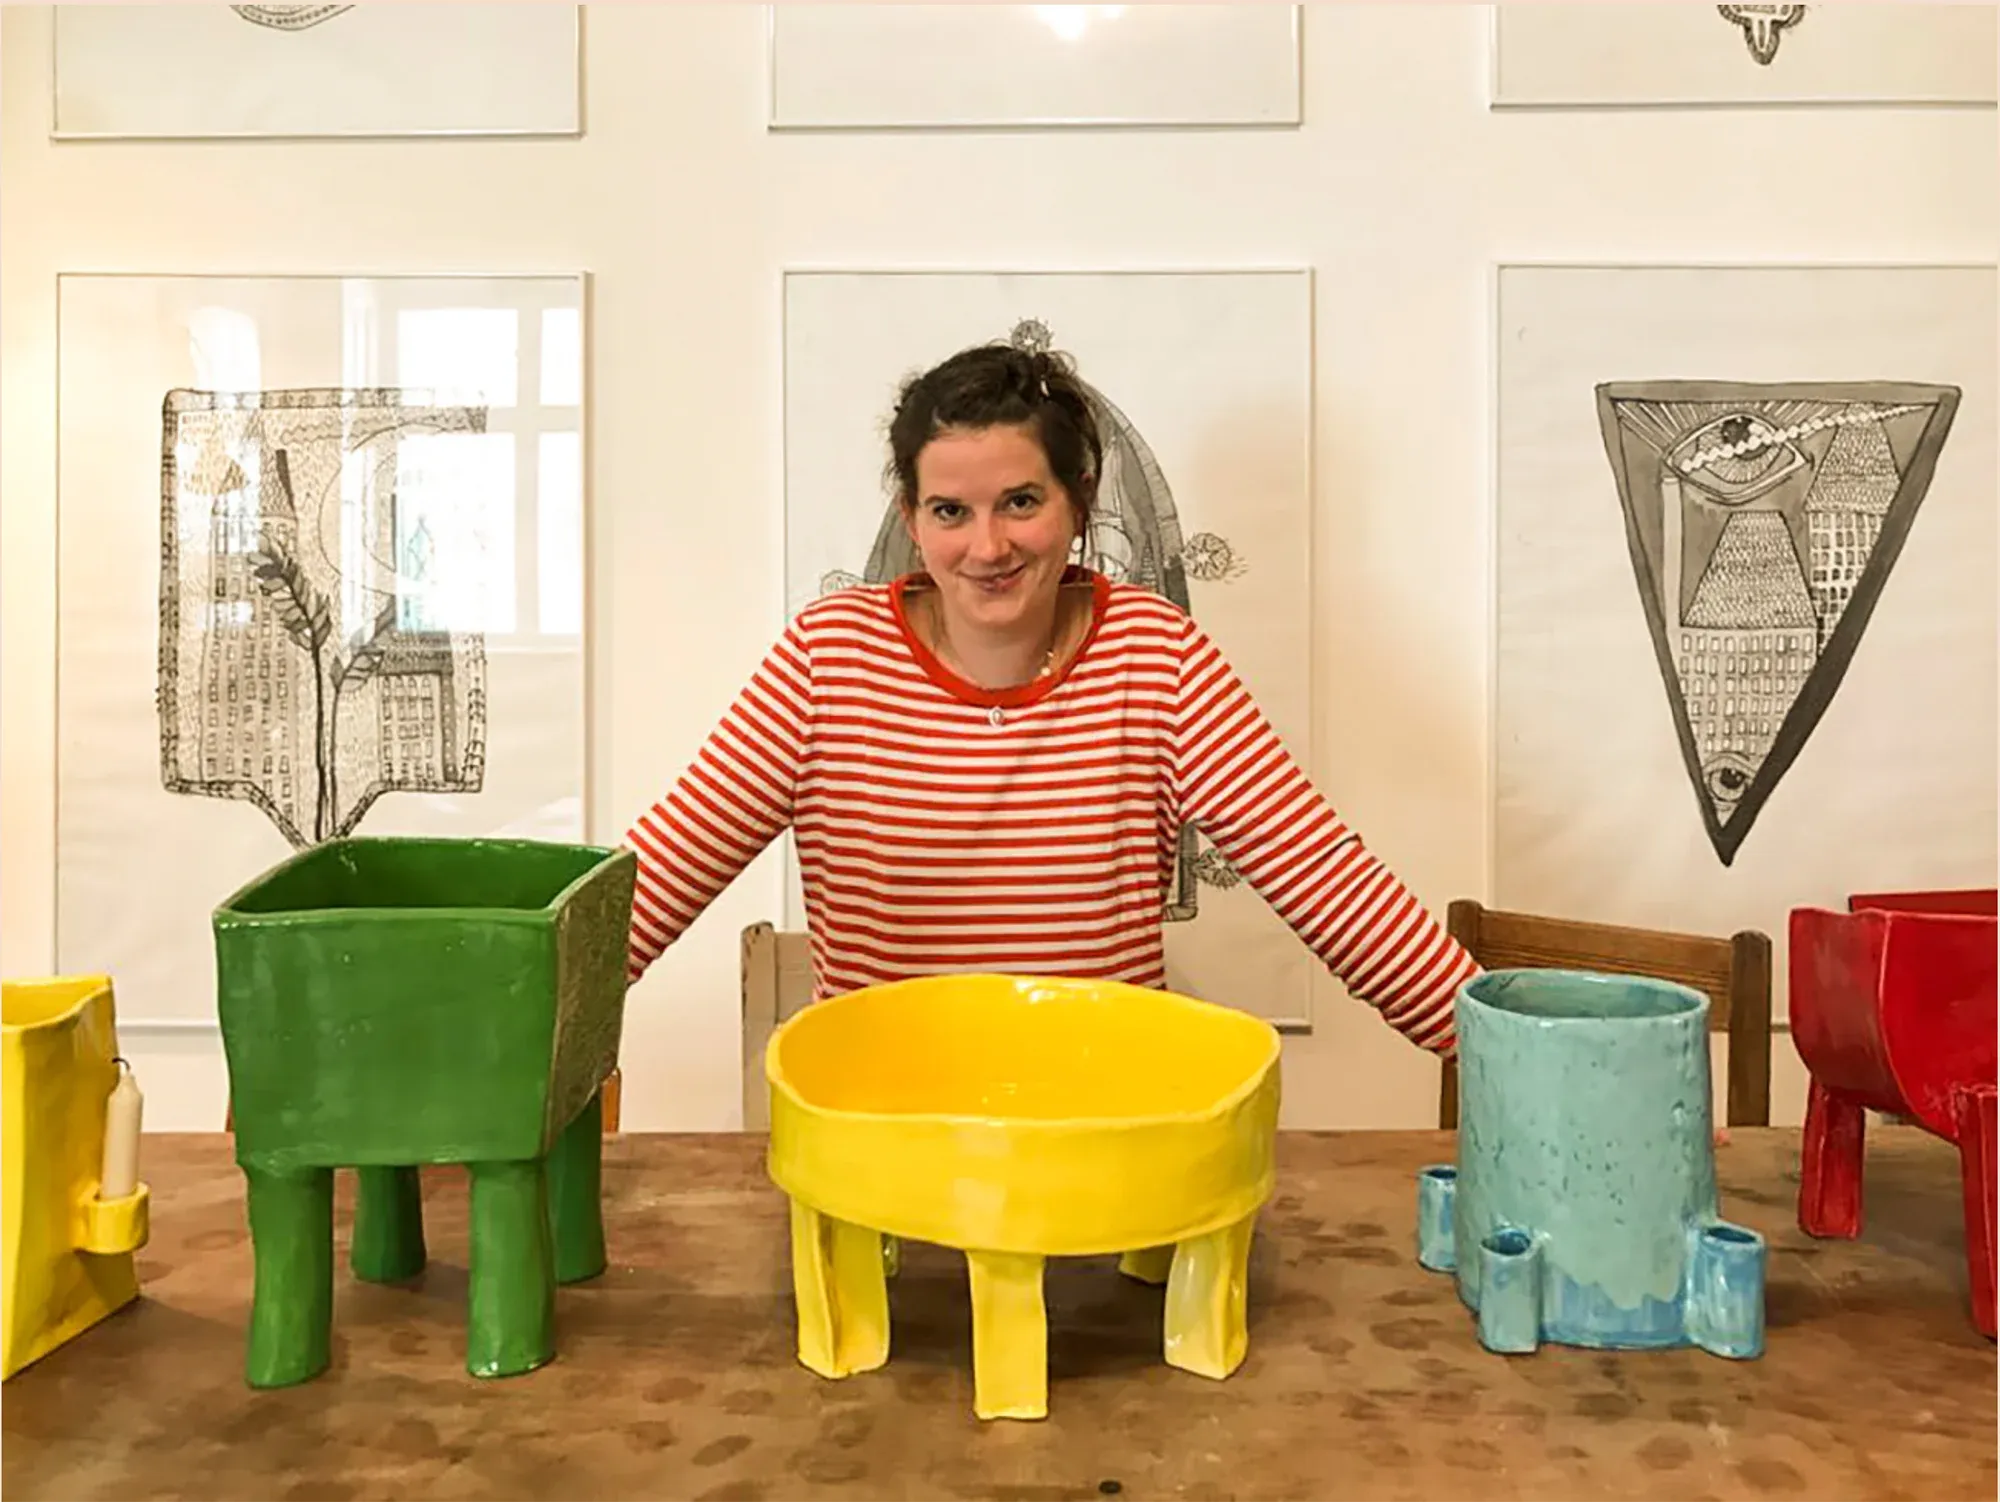 onka allmayer-beck in front of her colorful ceramics, promising artist vienna